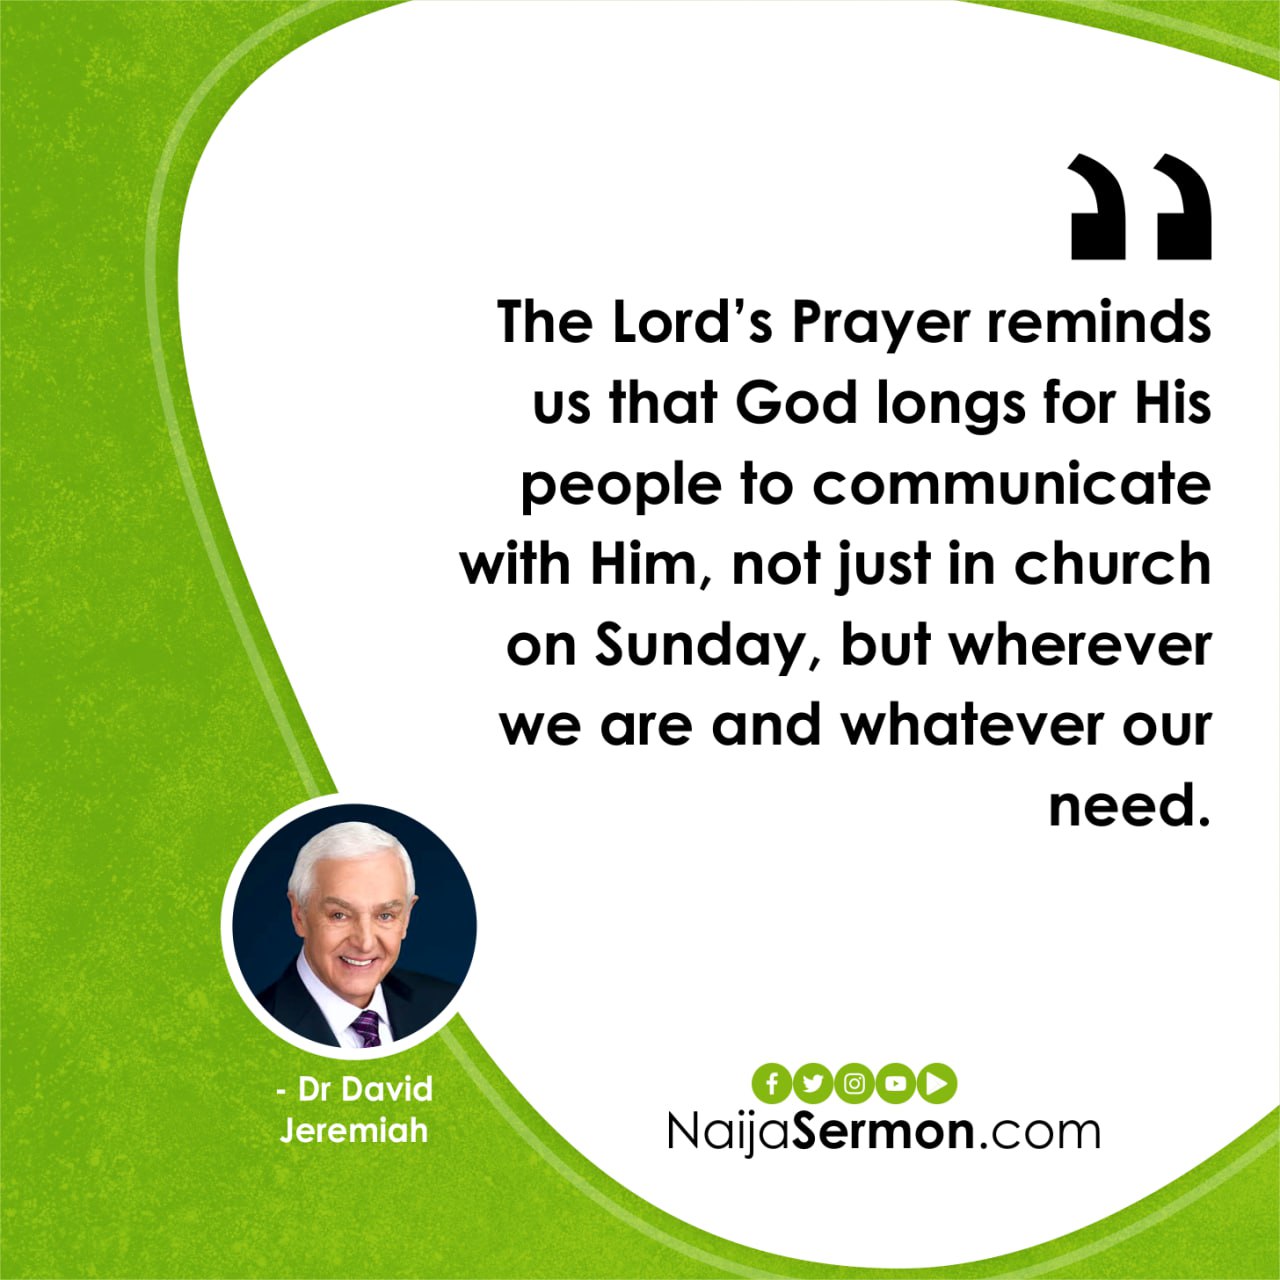 QUOTTE OF THE DAY BY DR. DAVID JEREMIAH 4